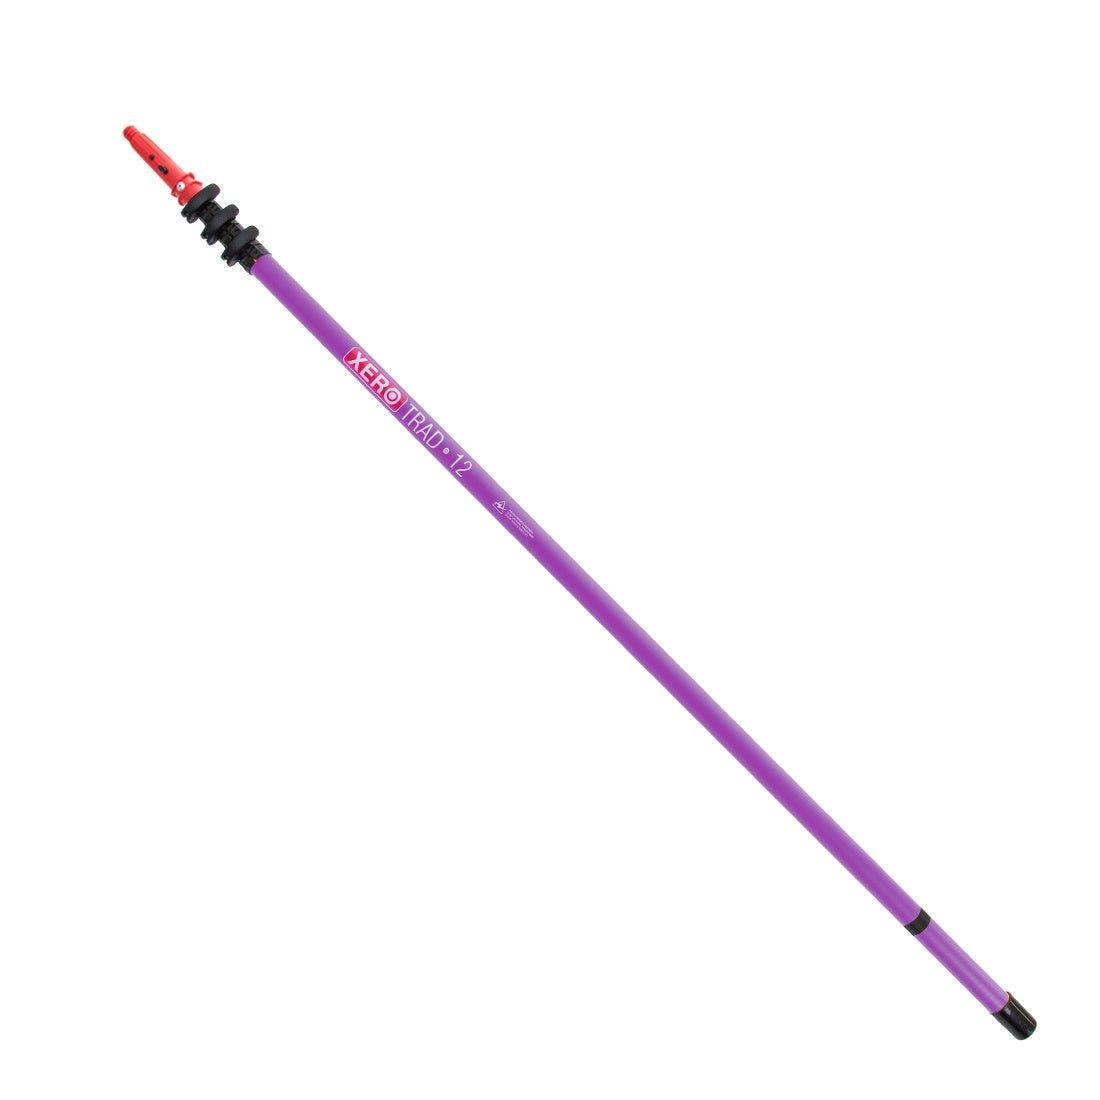 XERO Carbon Fiber Trad Pole 2.0 Unger Tip - Electric Purple 12 Foot Full View